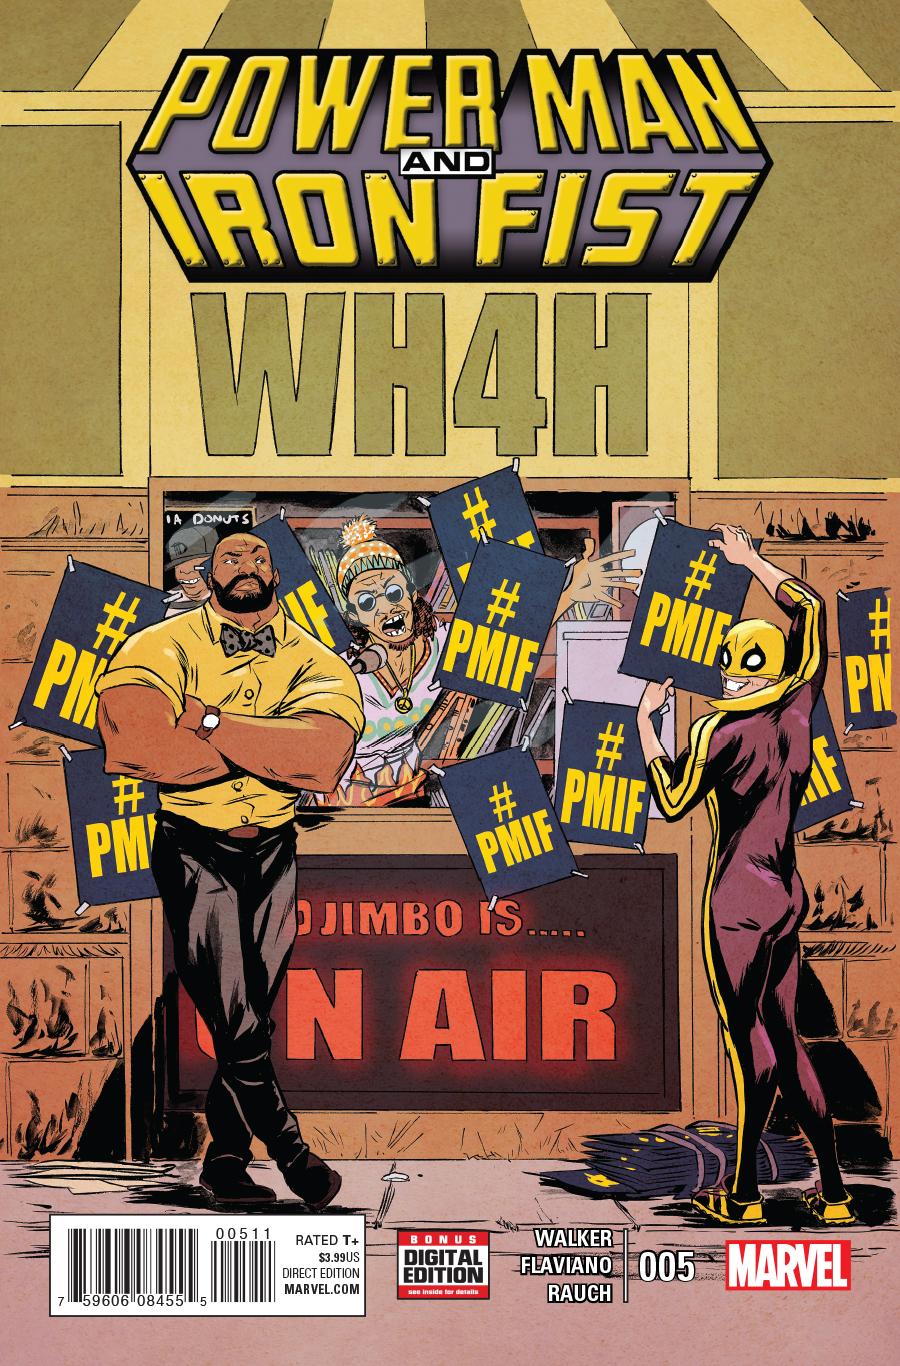 Power Man and Iron Fist Vol. 3 #5